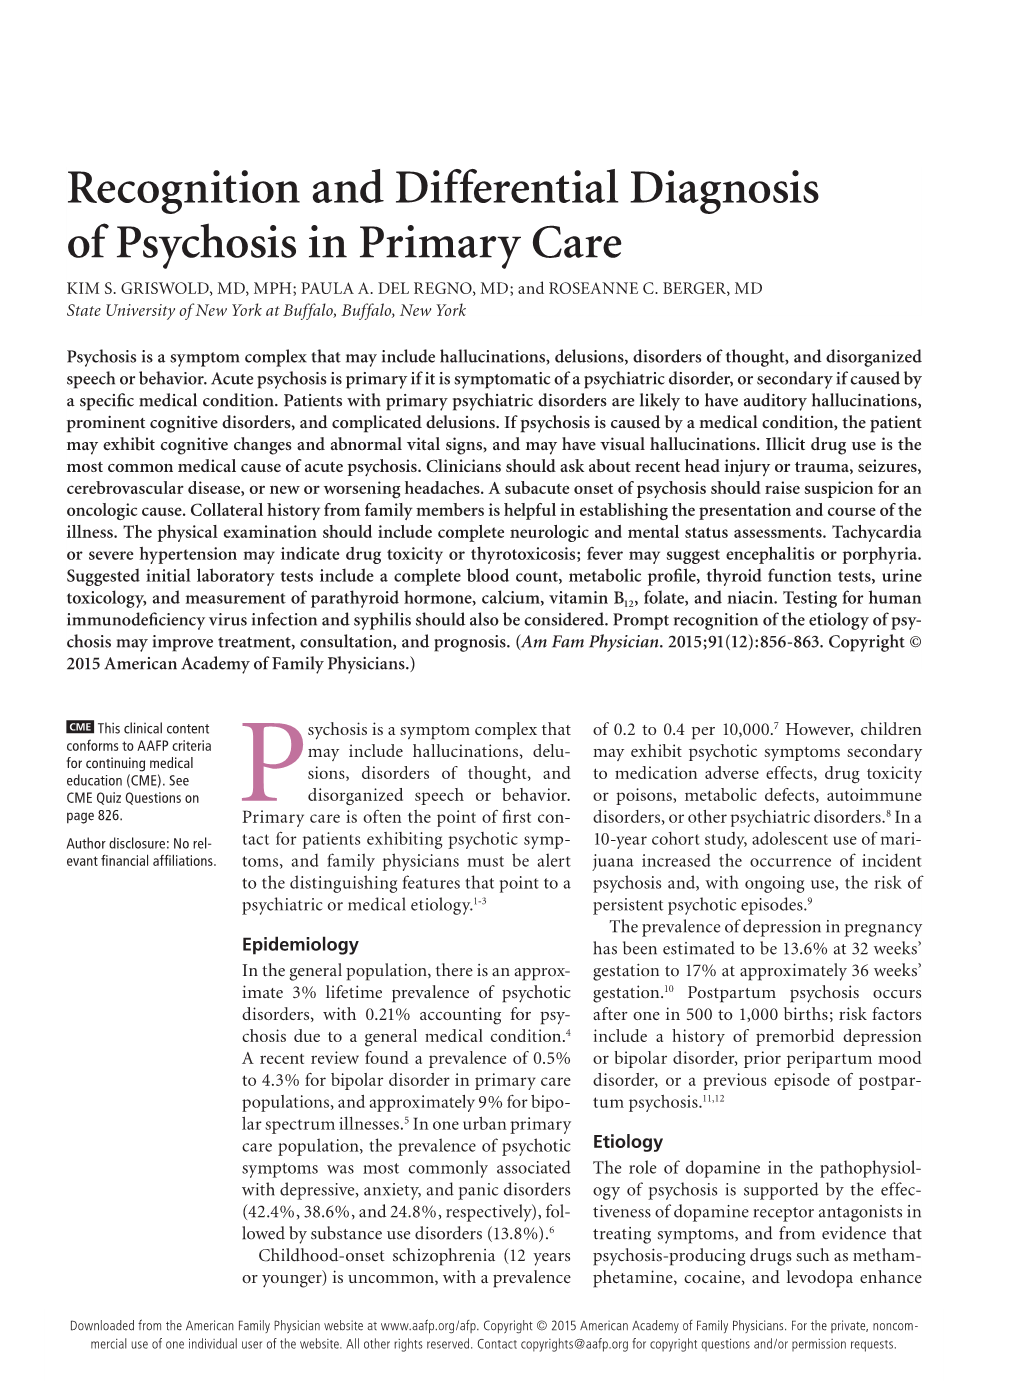 Recognition and Differential Diagnosis of Psychosis in Primary Care KIM S